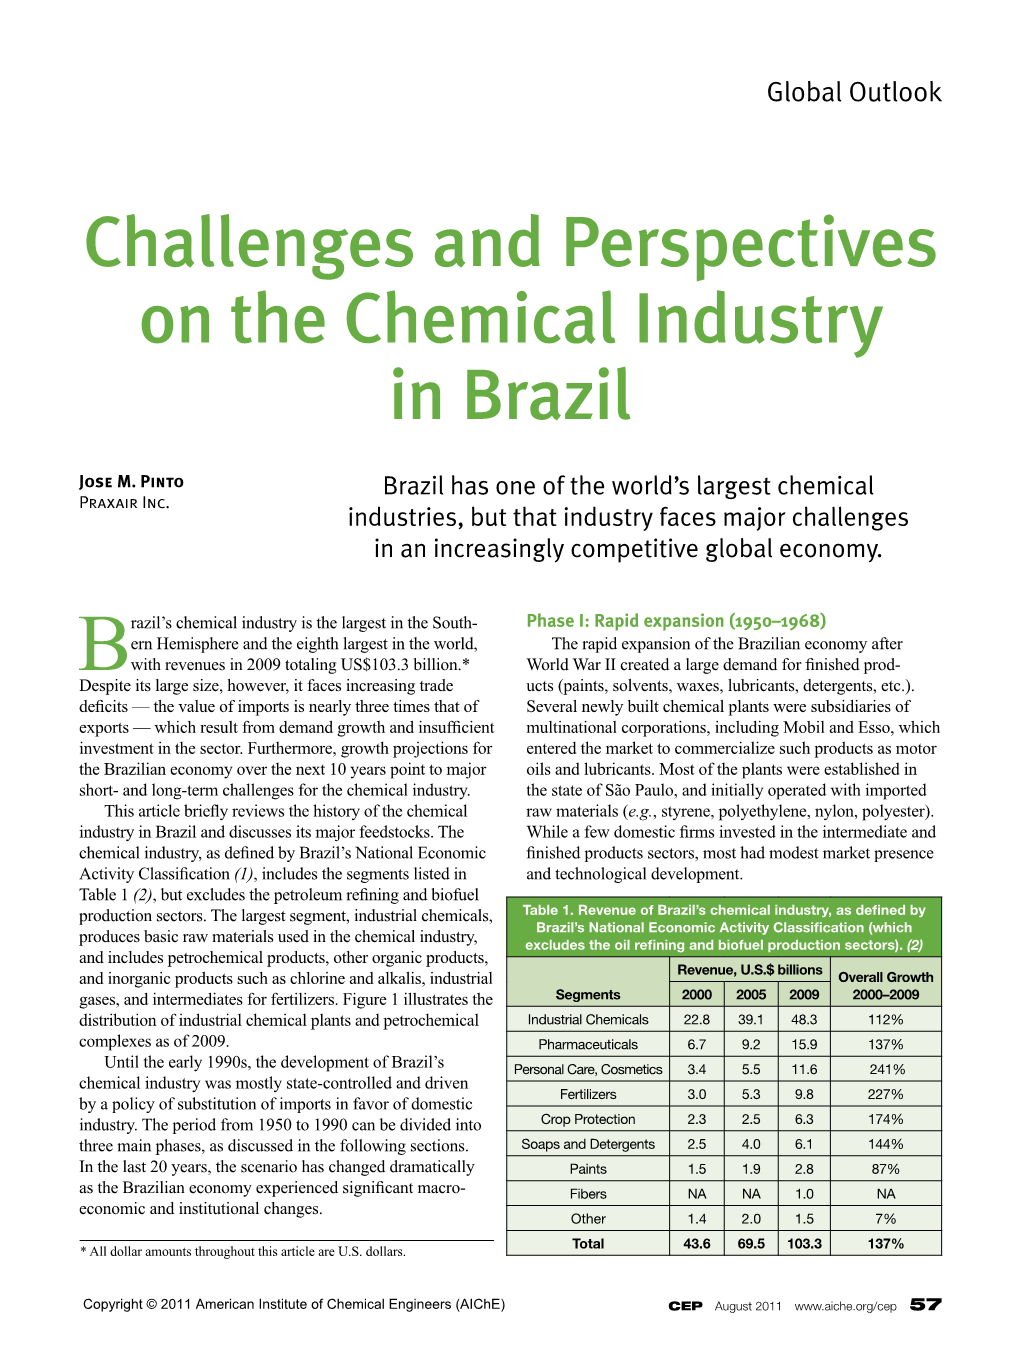 Challenges and Perspectives on the Chemical Industry in Brazil